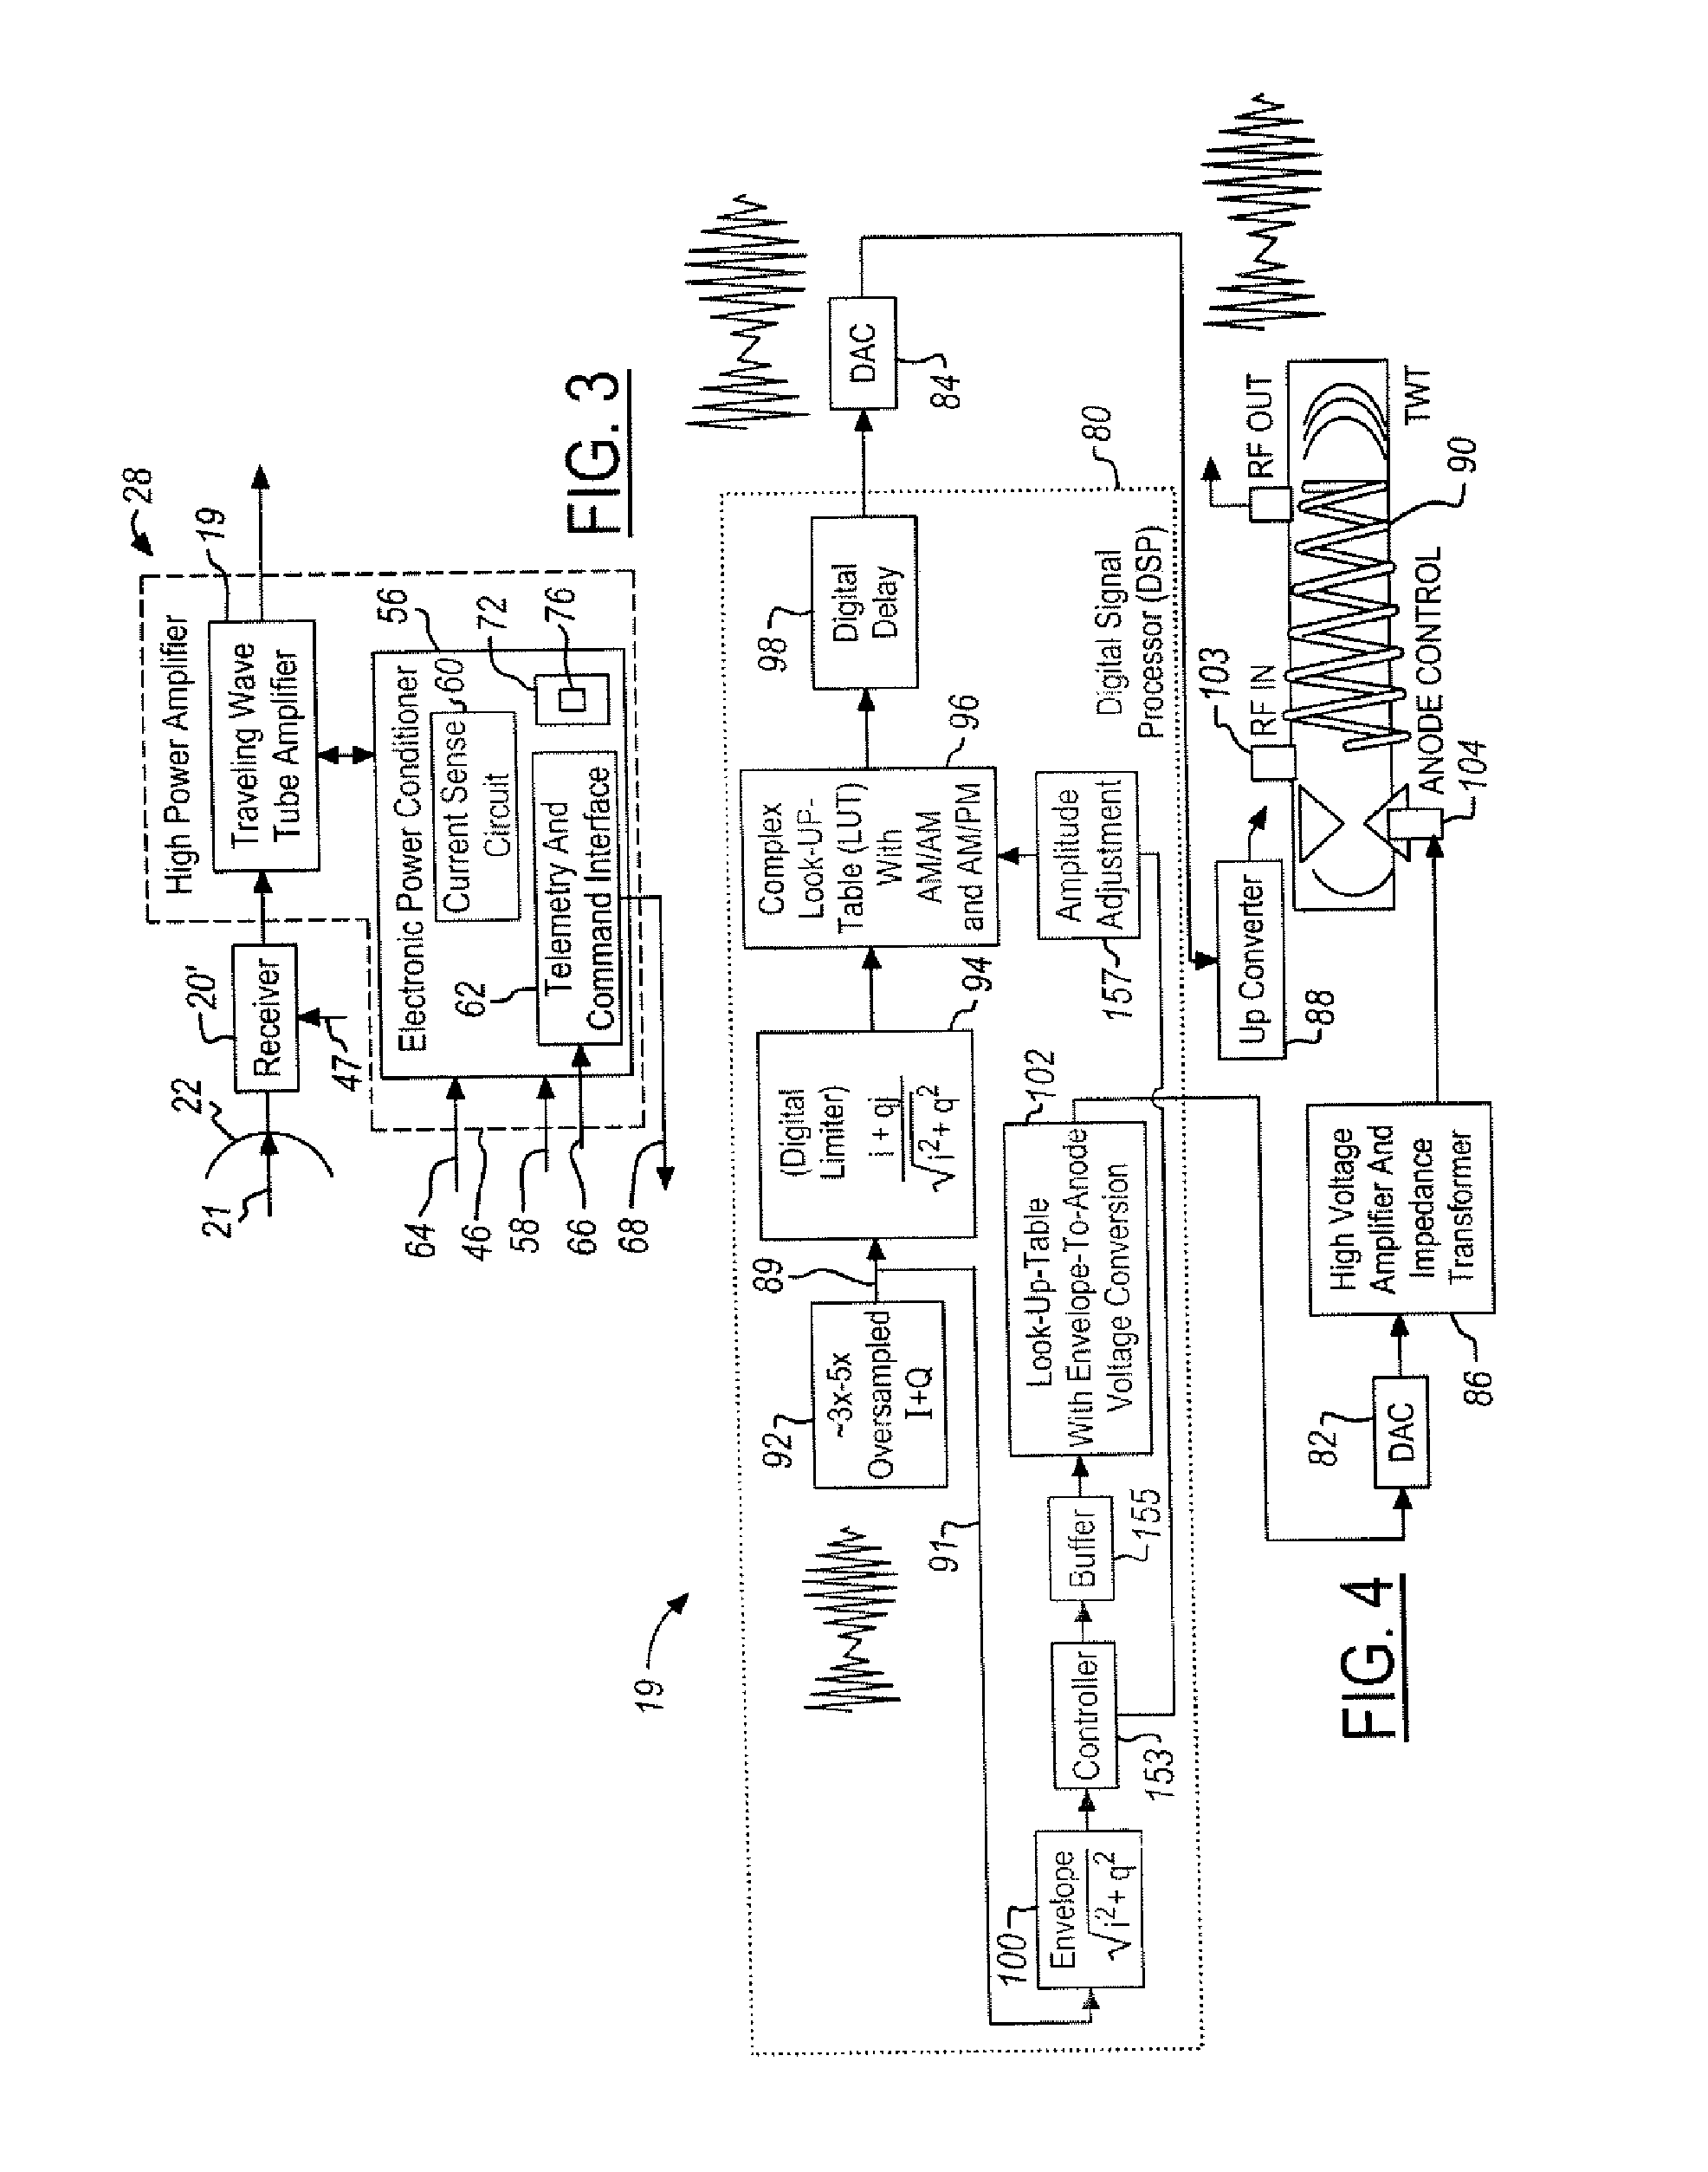 System and Method for Envelope Modulation